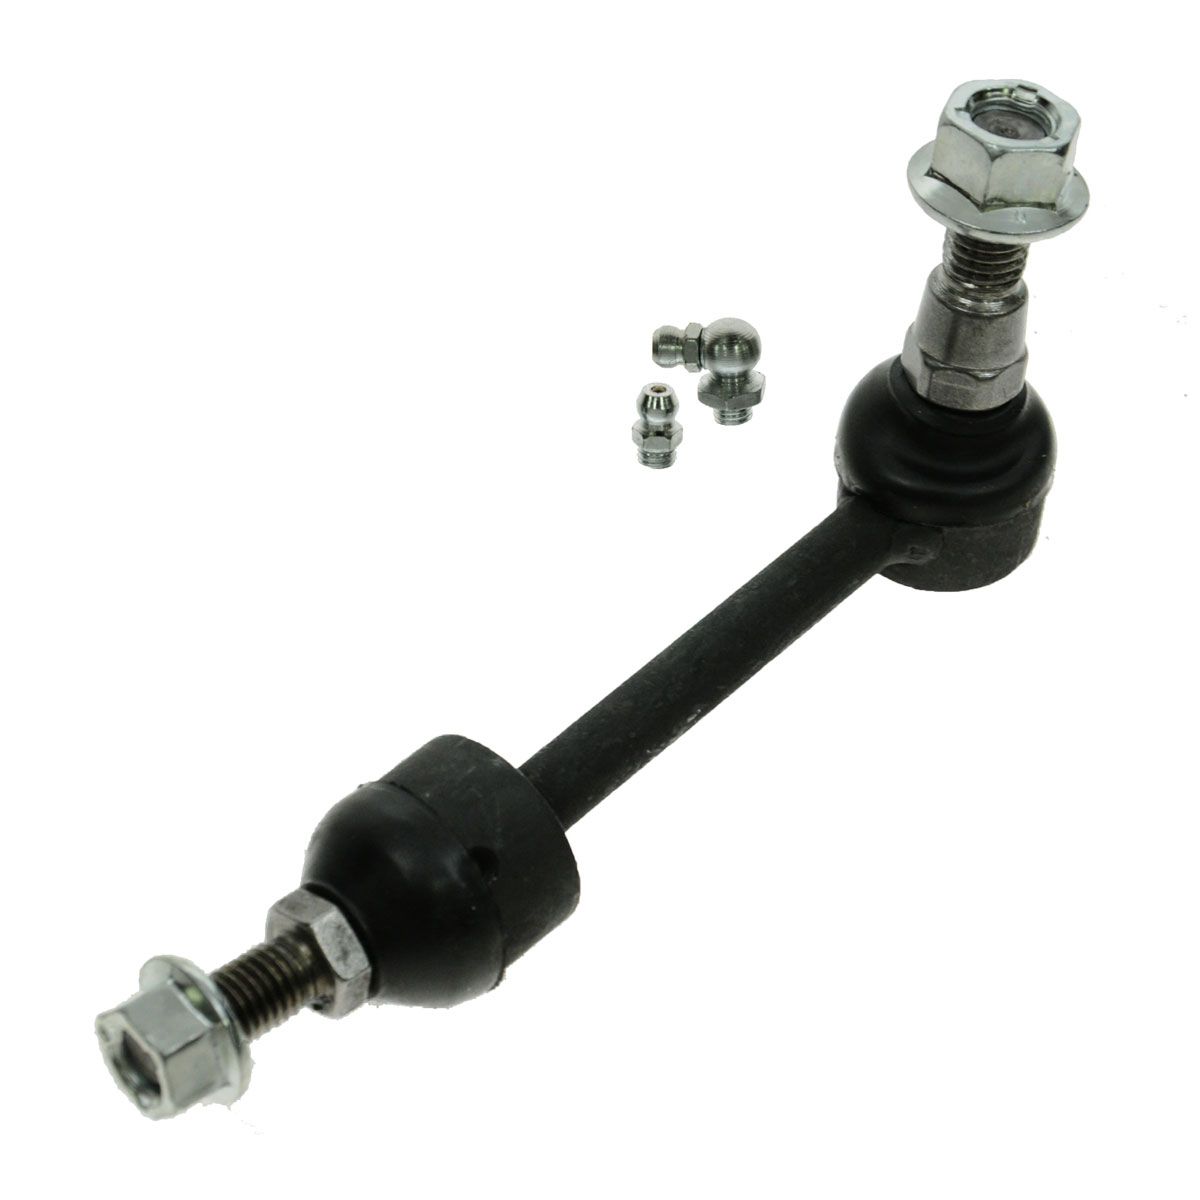 Front Sway Stabilizer Bar End Link for Ford F150 Pickup Truck 4WD 4x4 | eBay 2007 Ford F150 Sway Bar Link Torque Specs